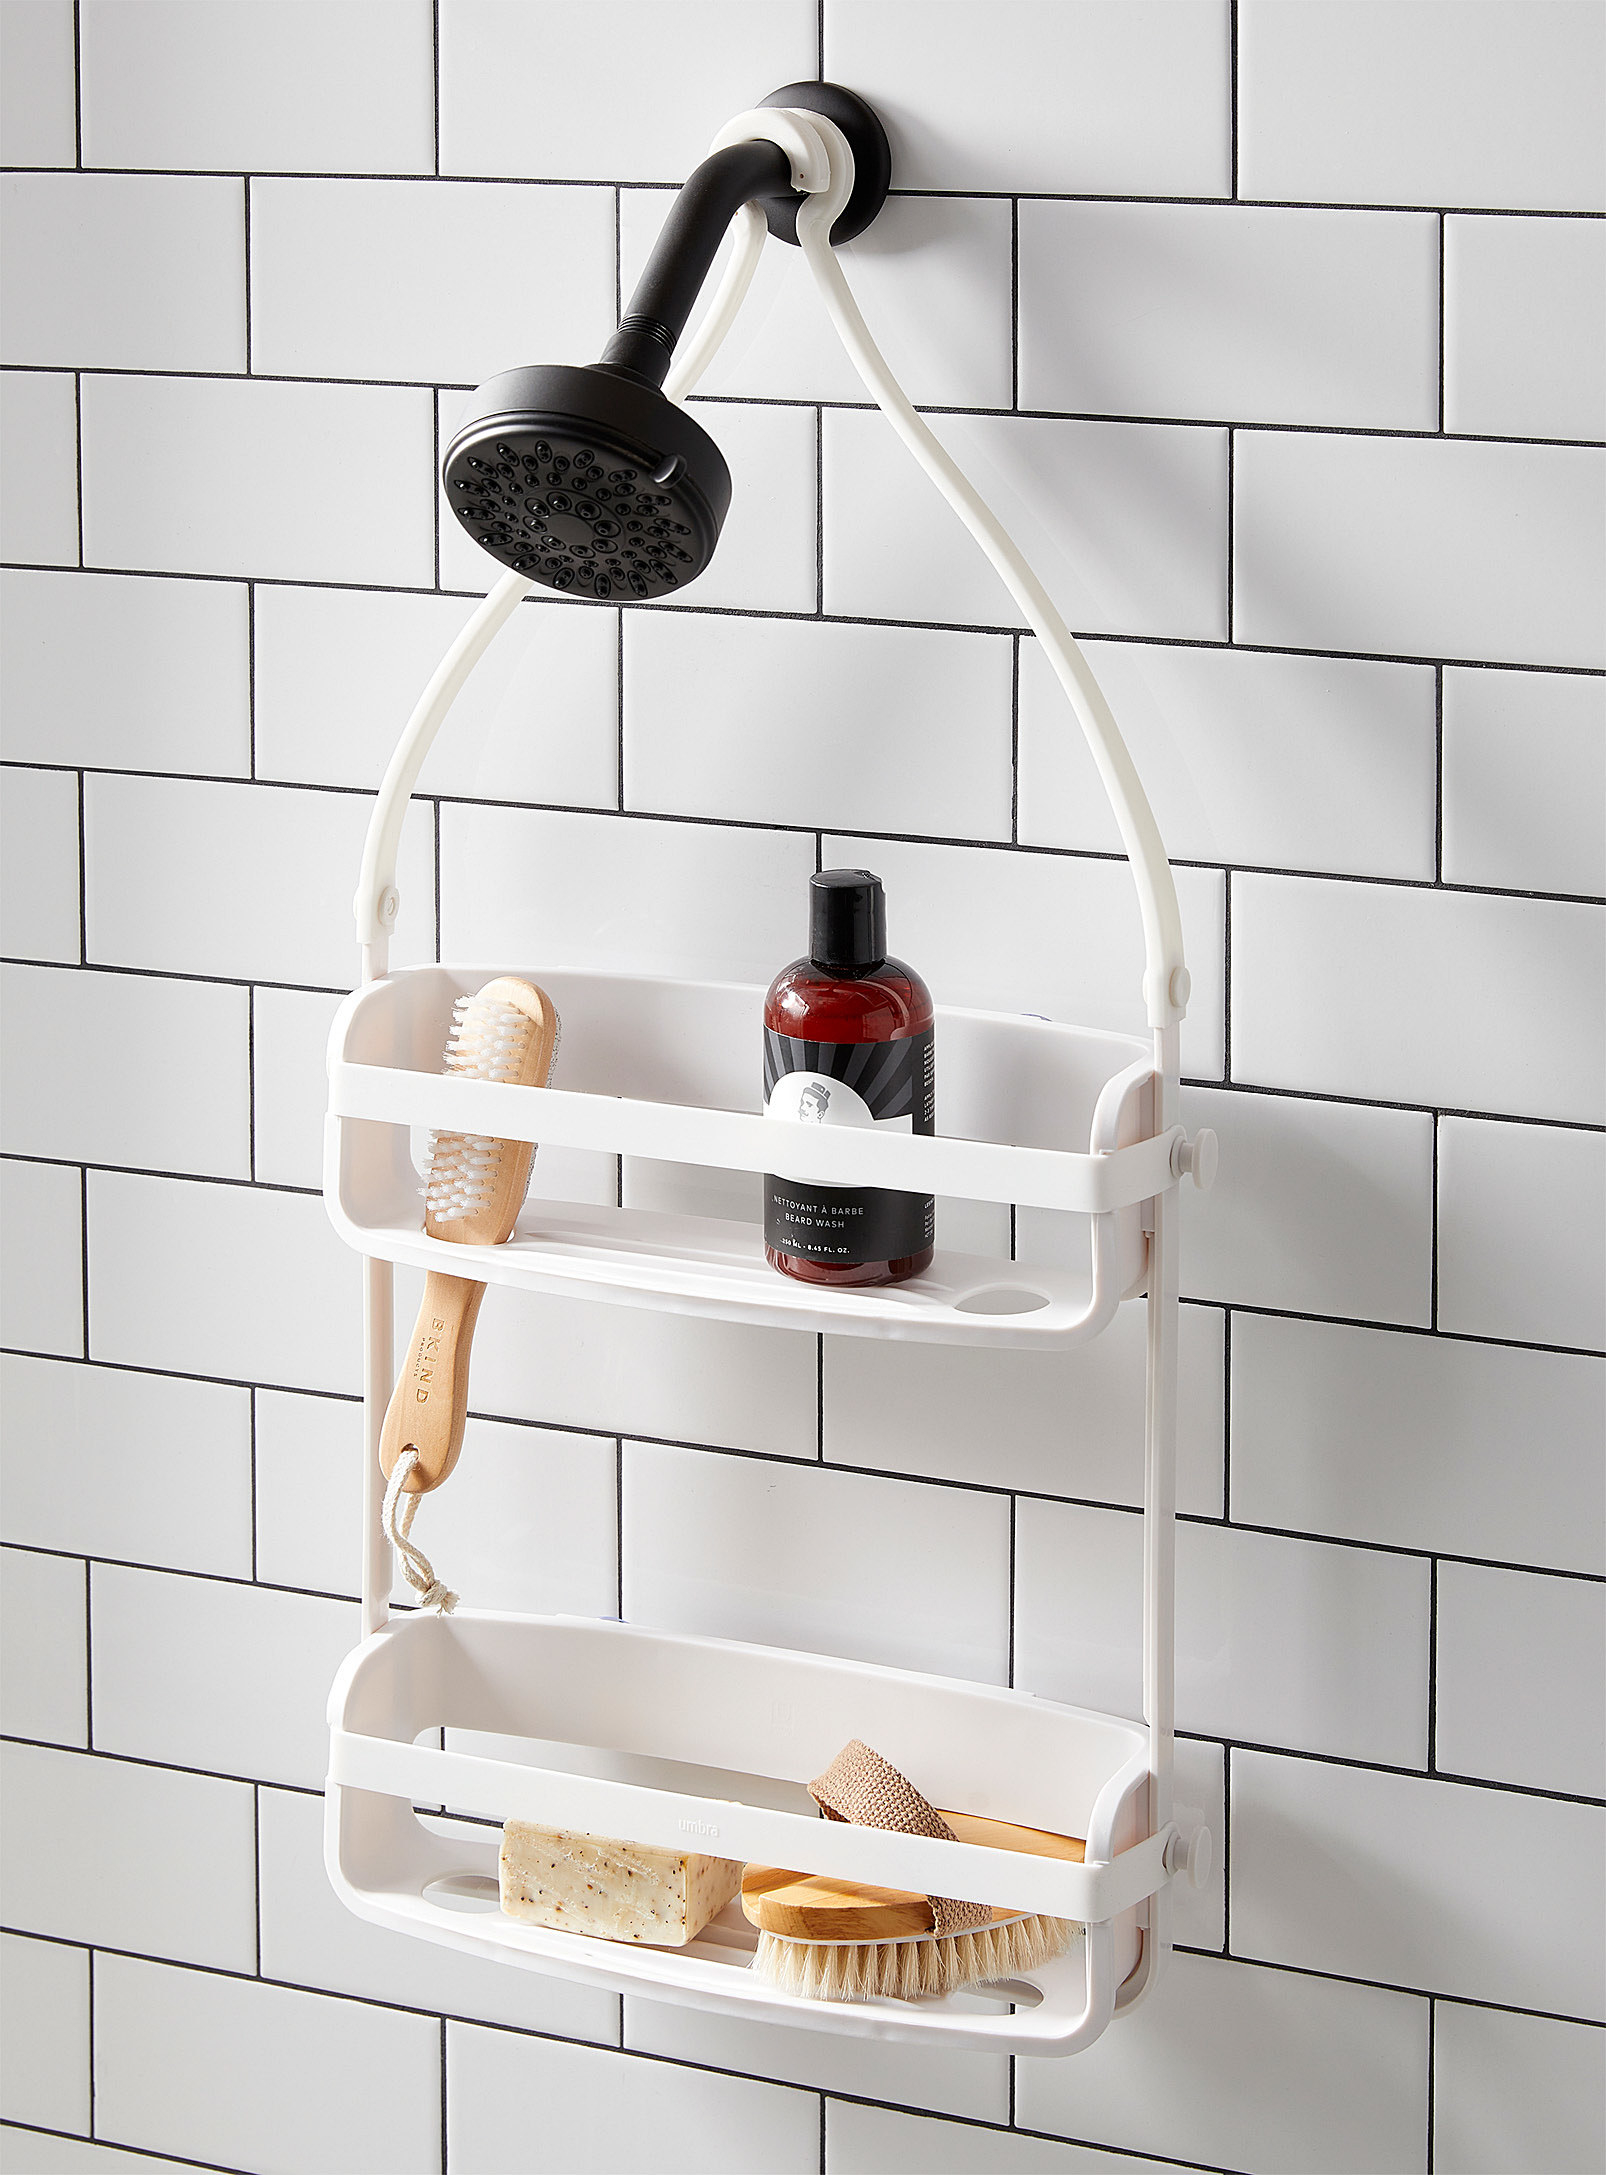 A two tiered shower caddy hanging from a shower hose